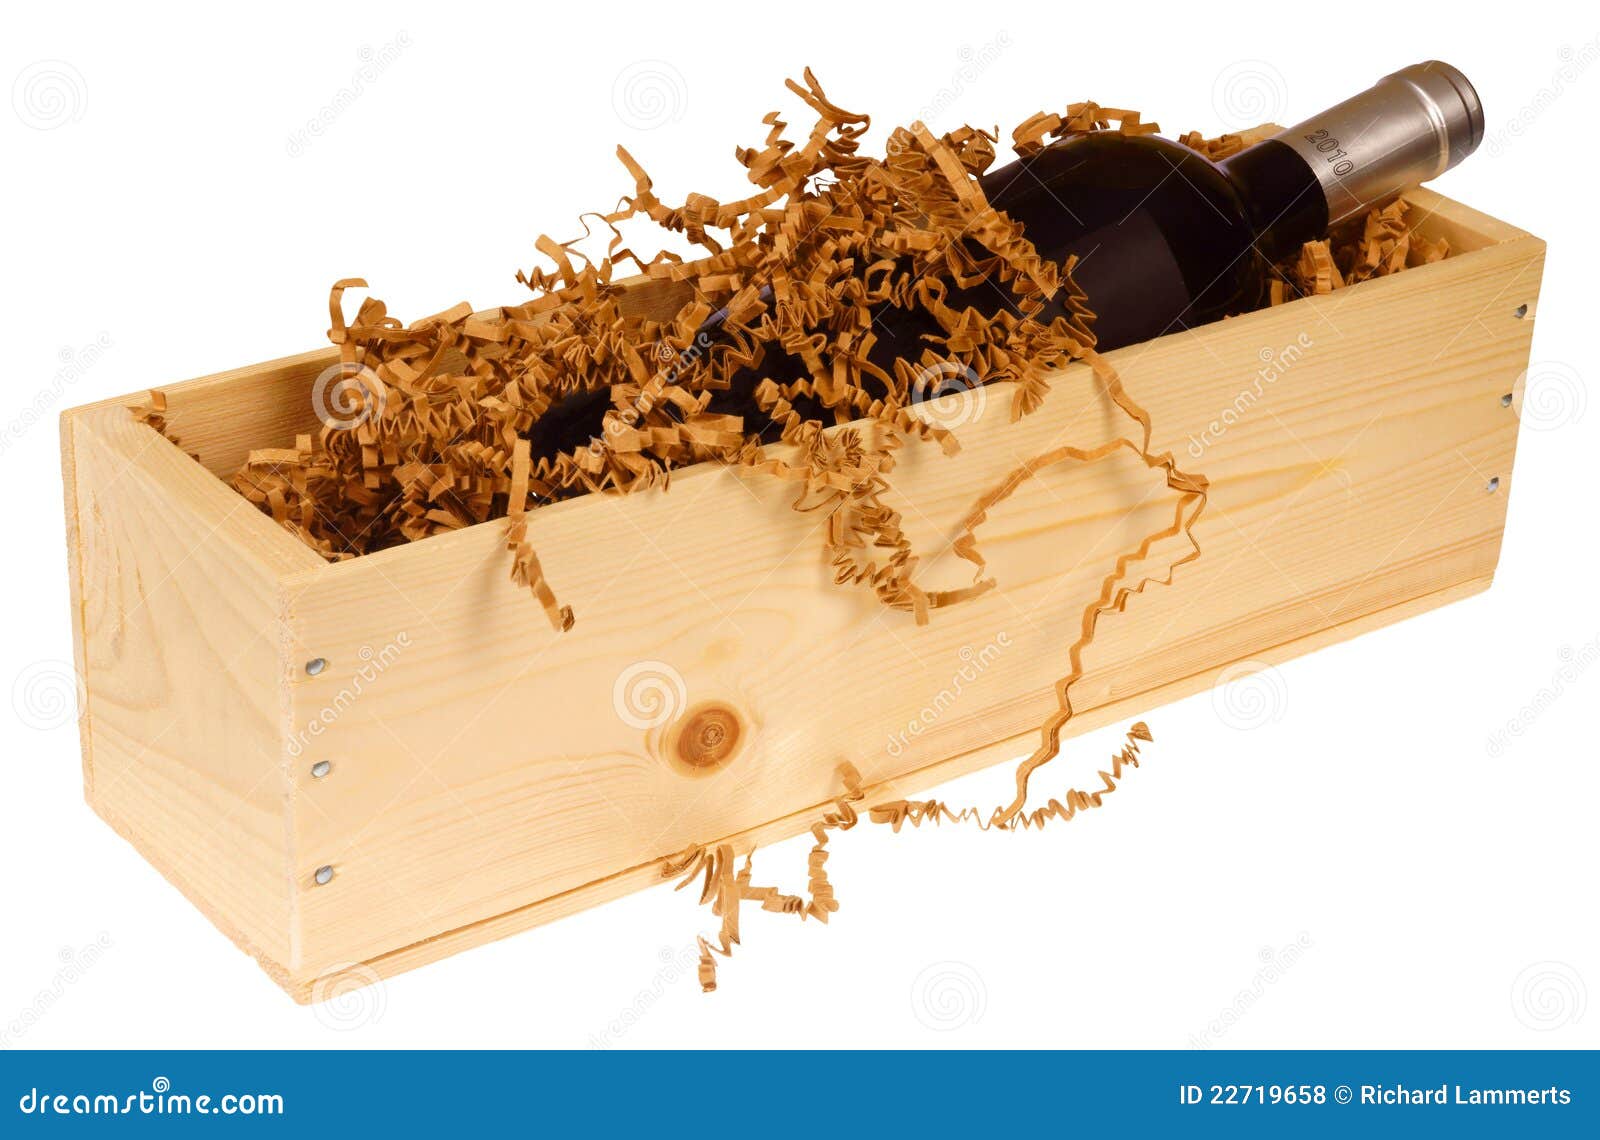 Wine bottle in wooden box stock photo. Image of alcoholic ...